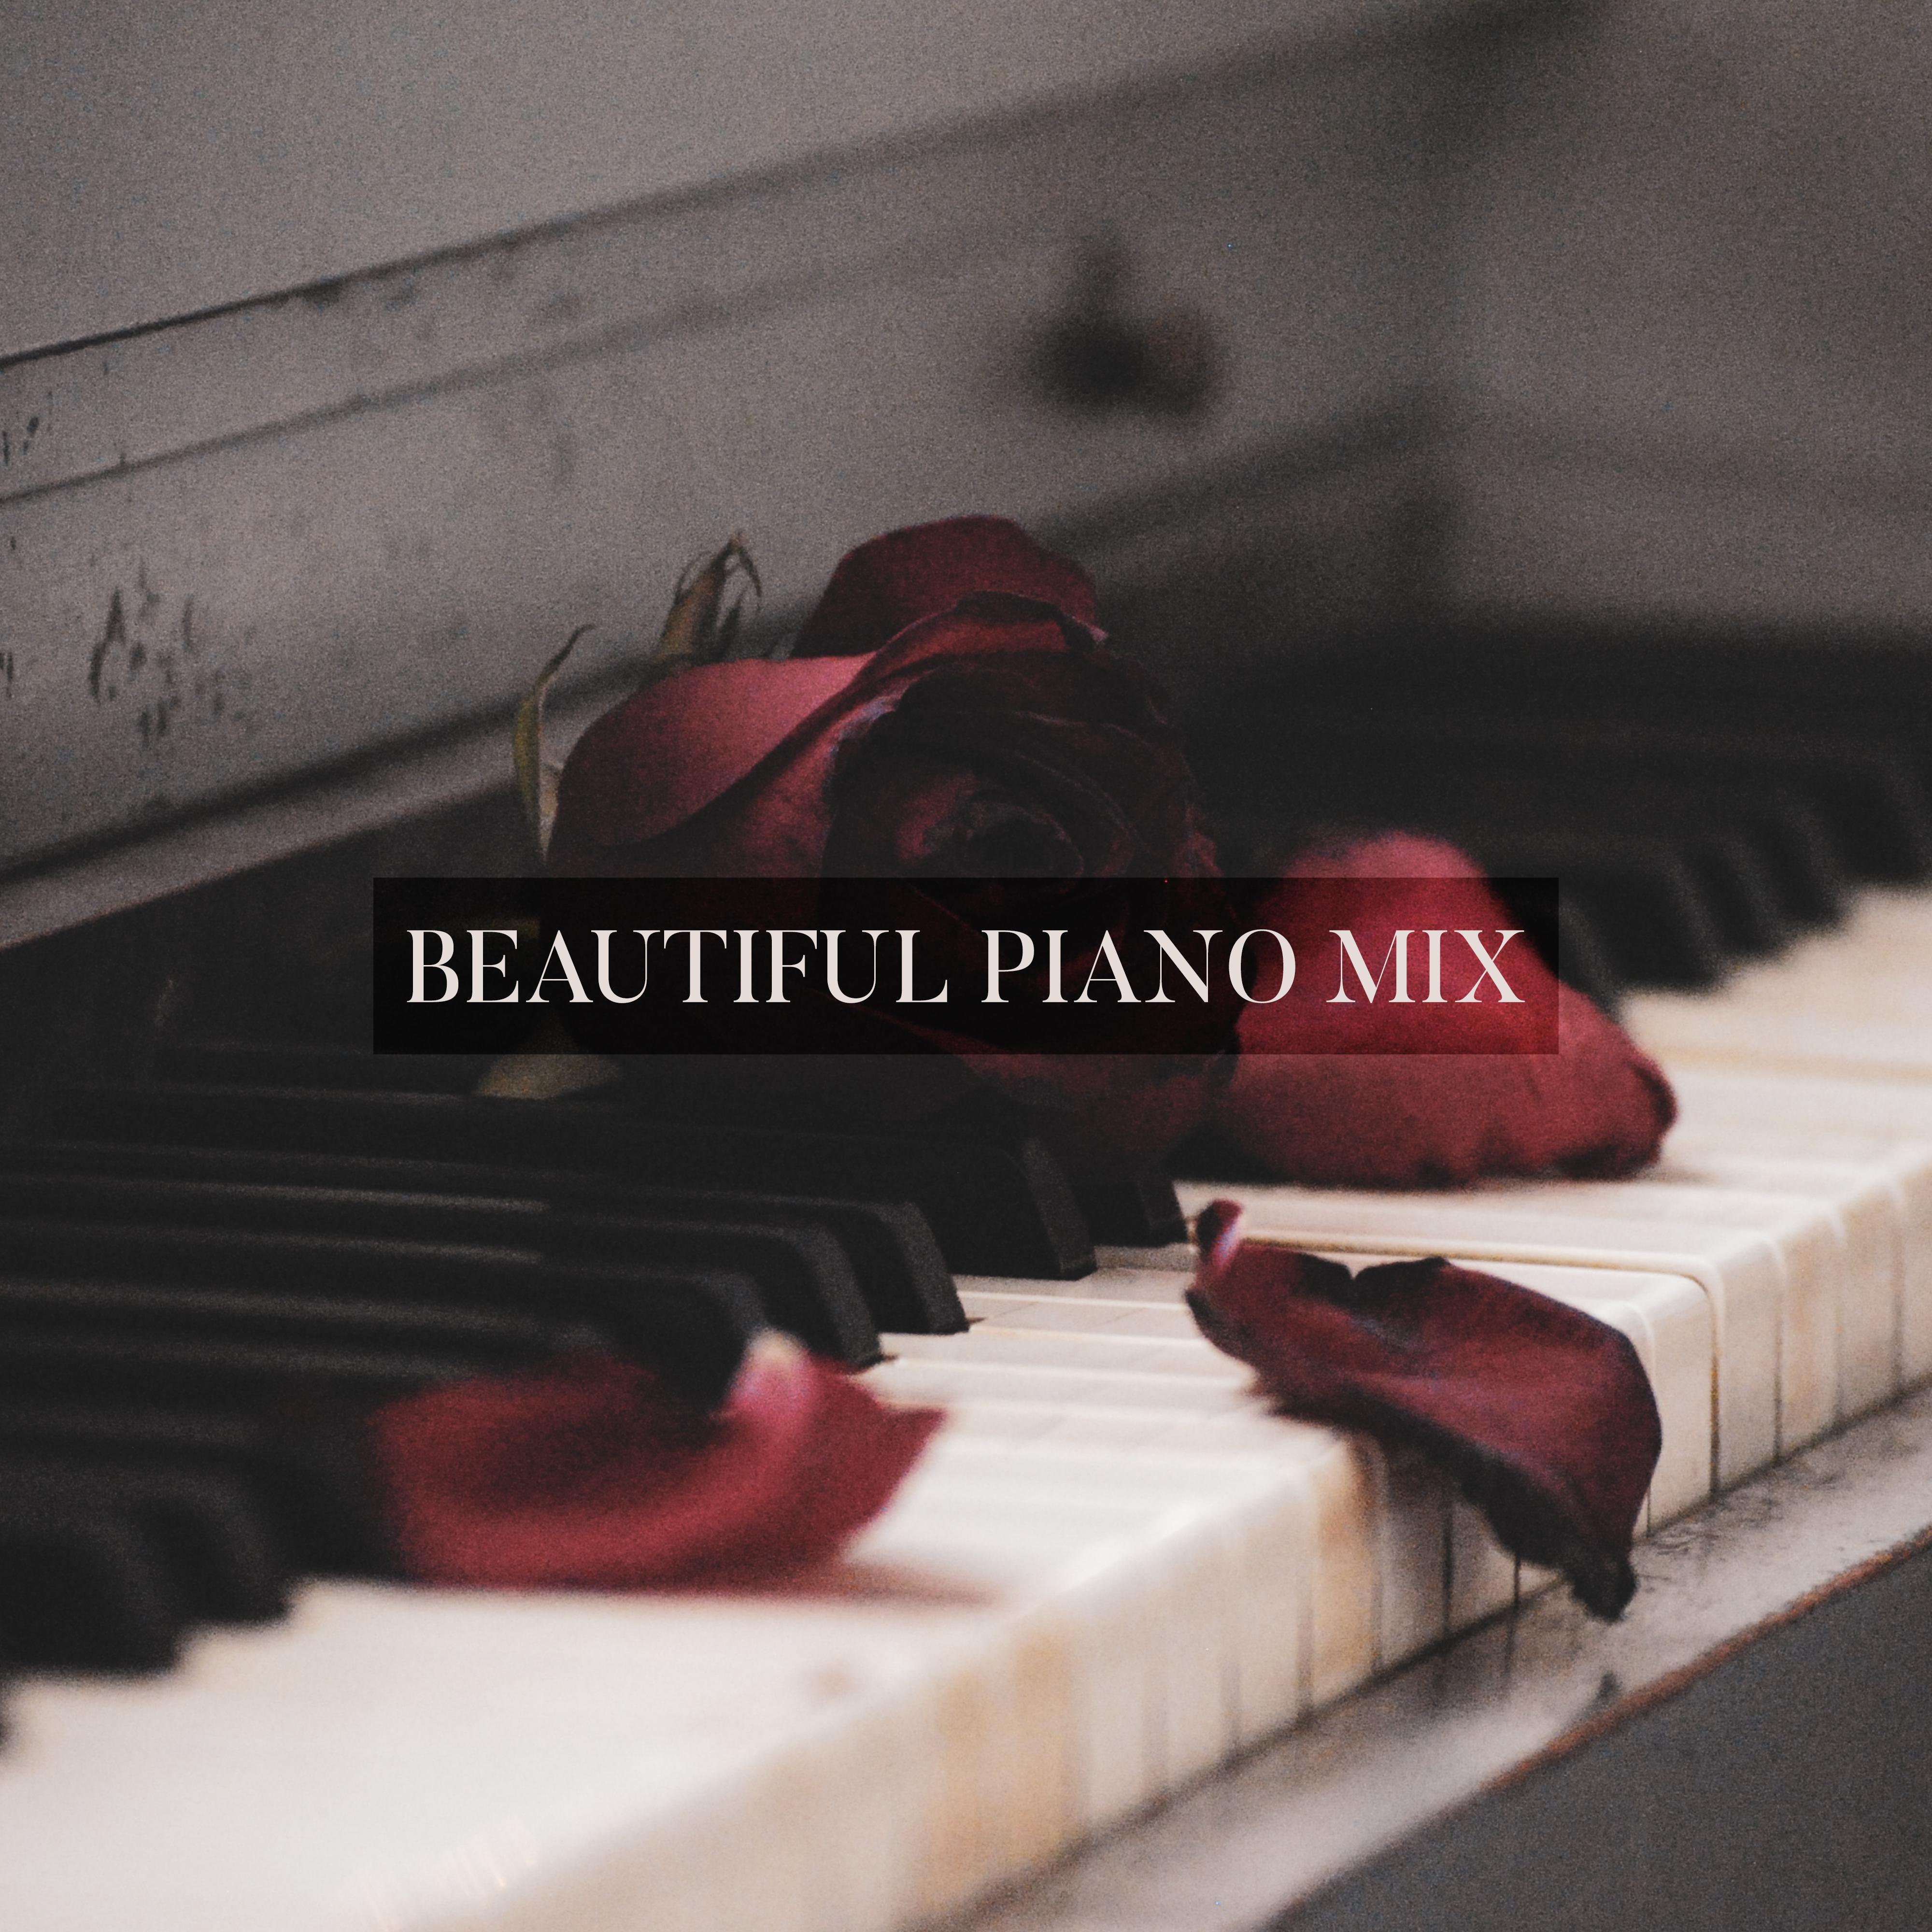 Beautiful Piano Mix  Sensual Instrumental Songs for Lovers, Piano Music, Romantic Date, Jazz Music Ambient